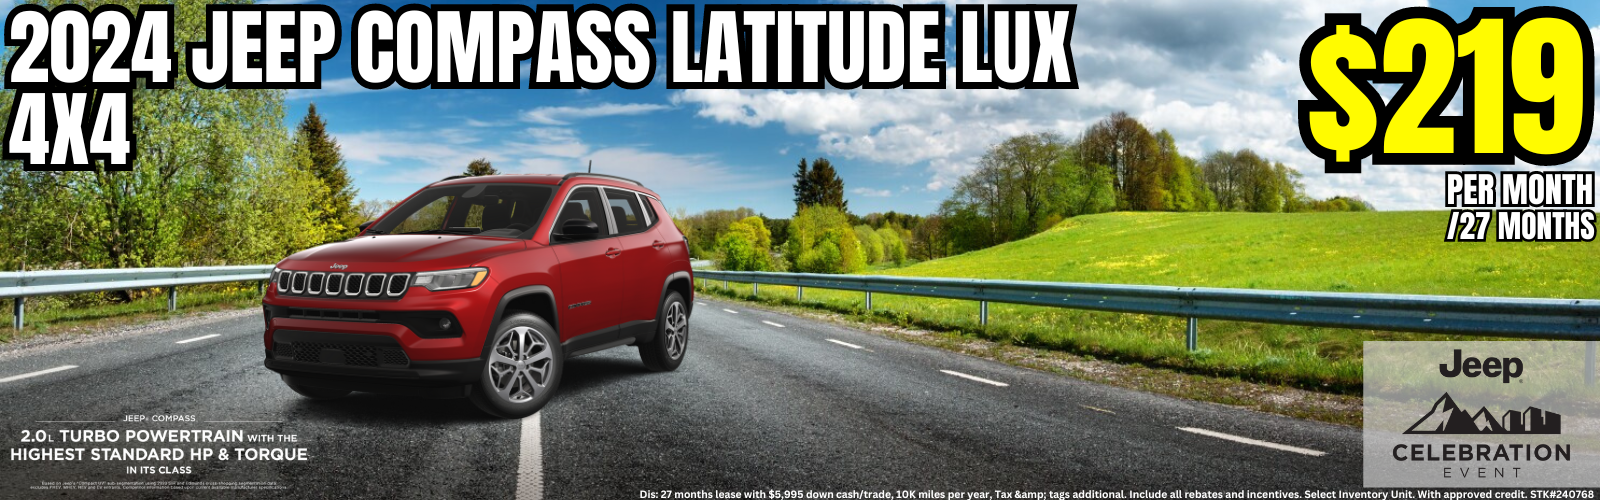 Compass Latitude Lux Lease Special